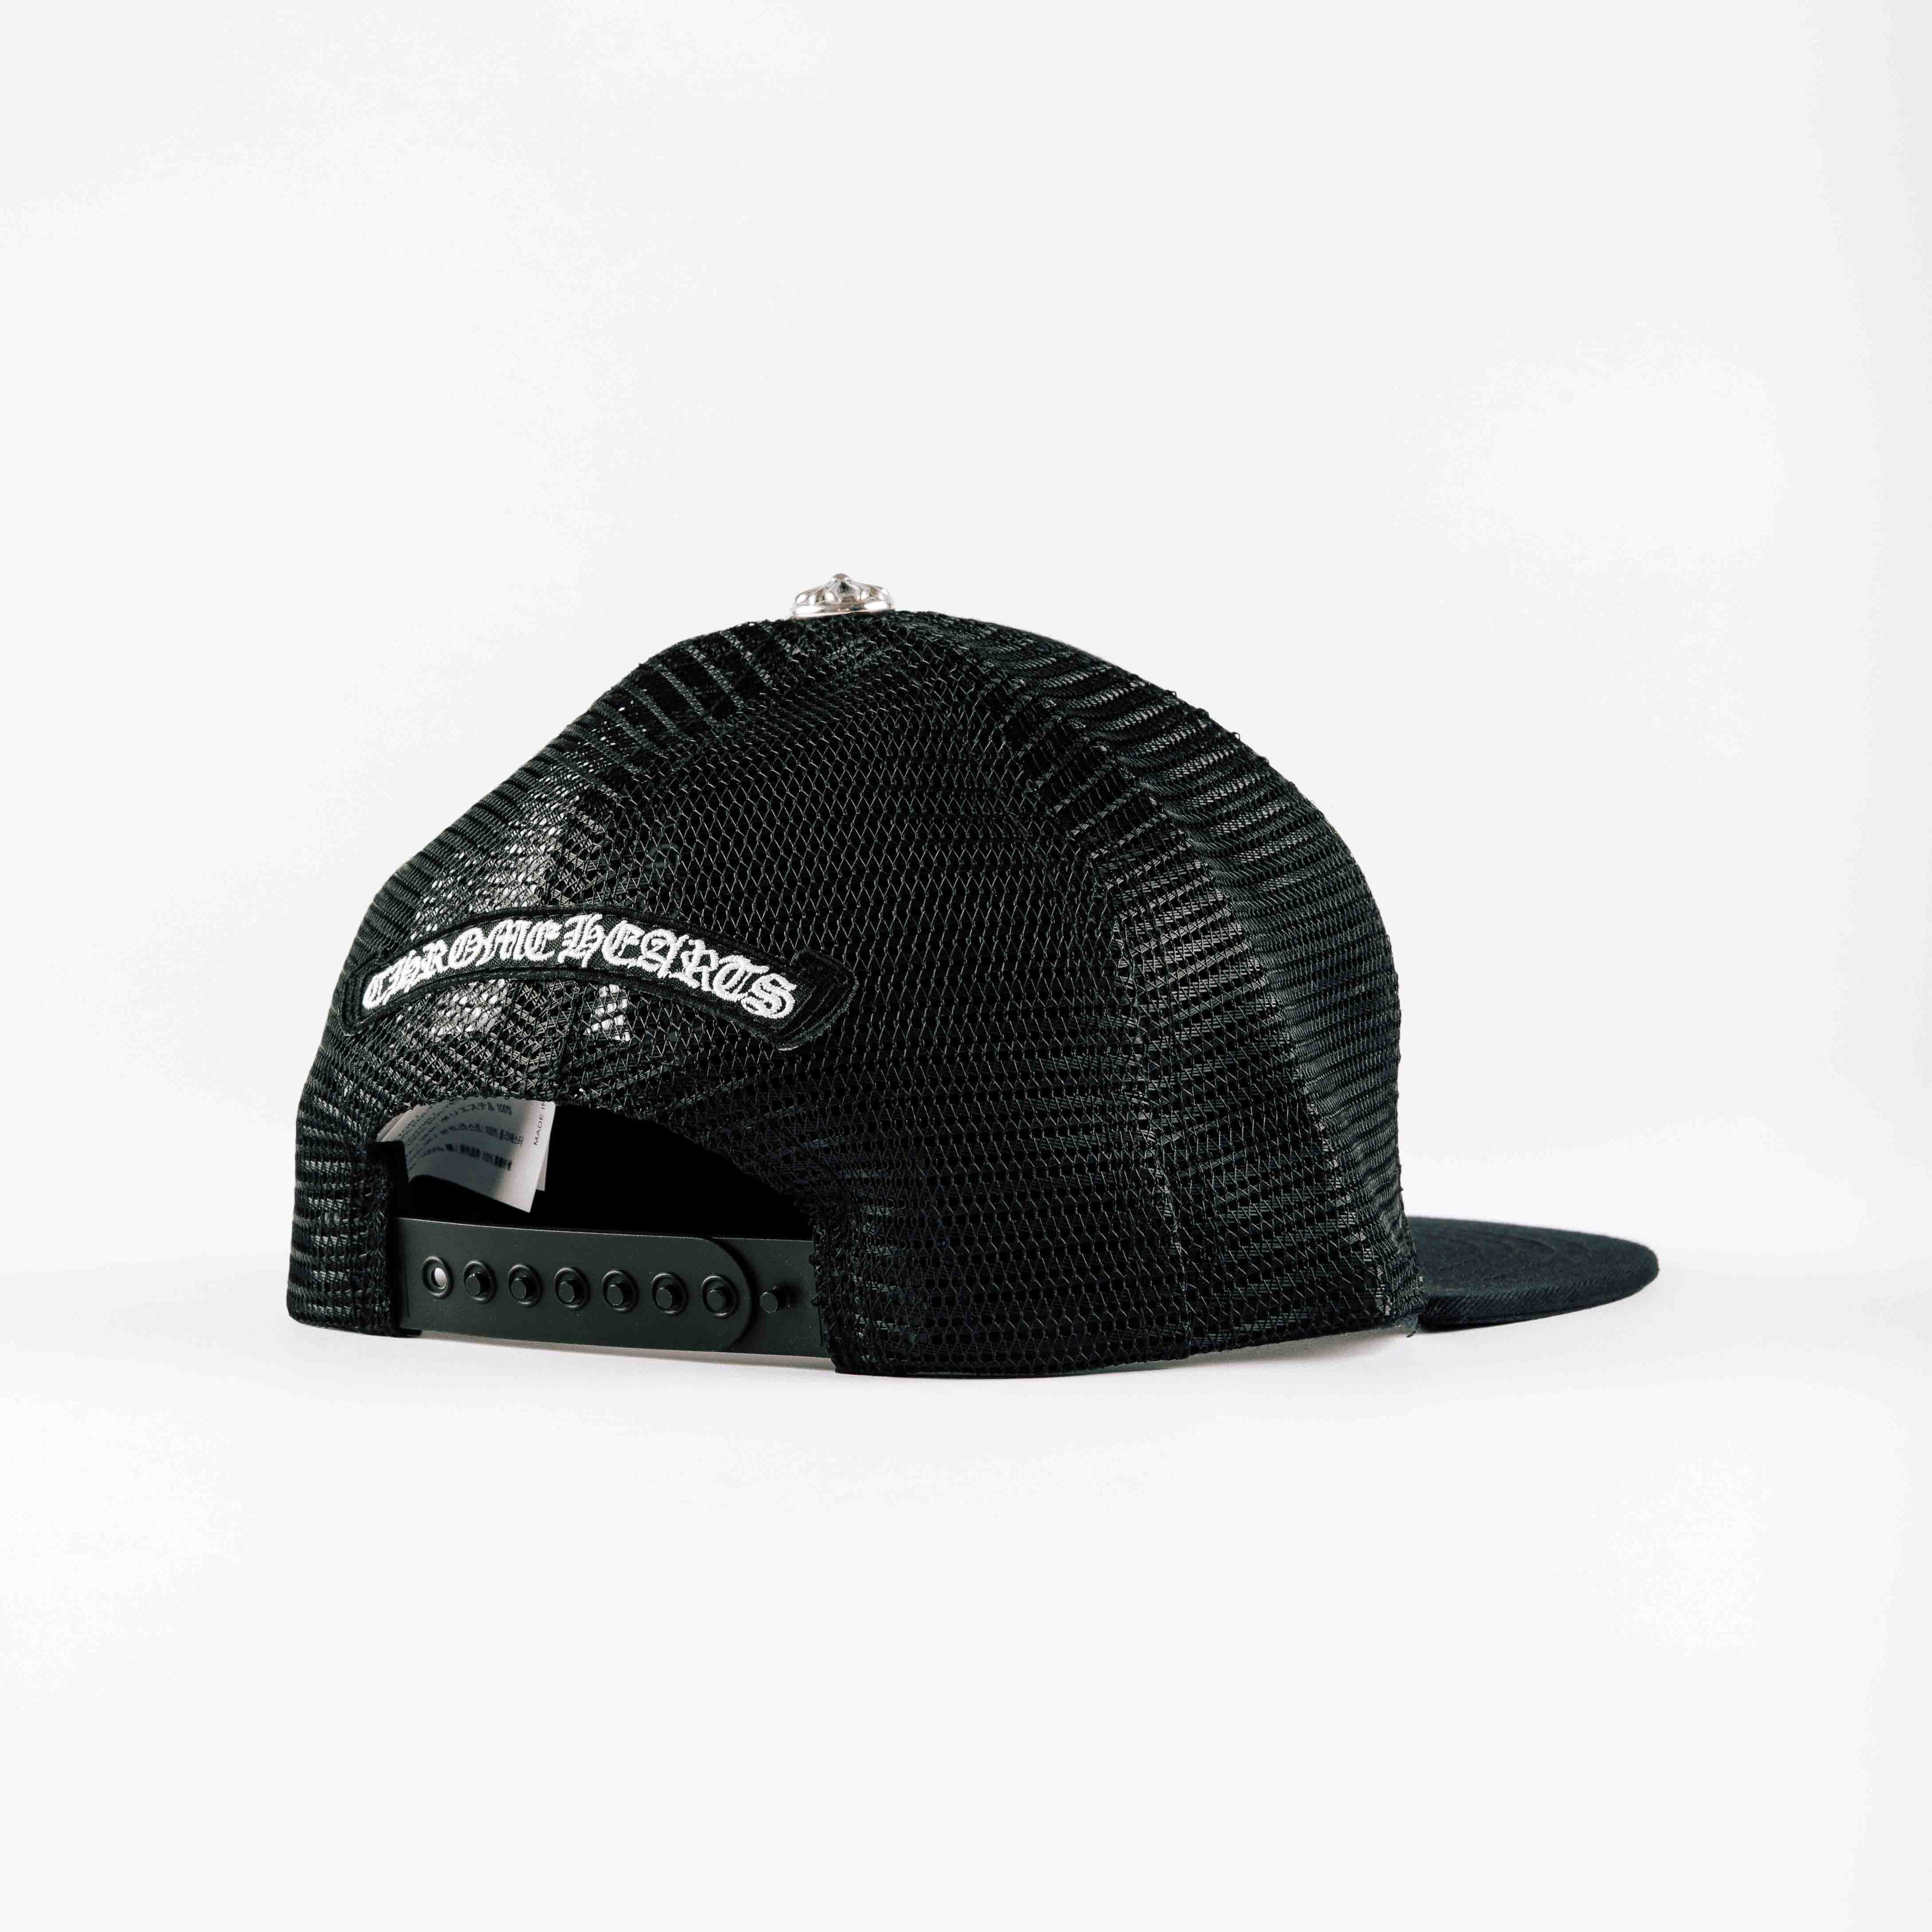 Chrome Hearts Arch Hollywood Trucker Hat Black/White